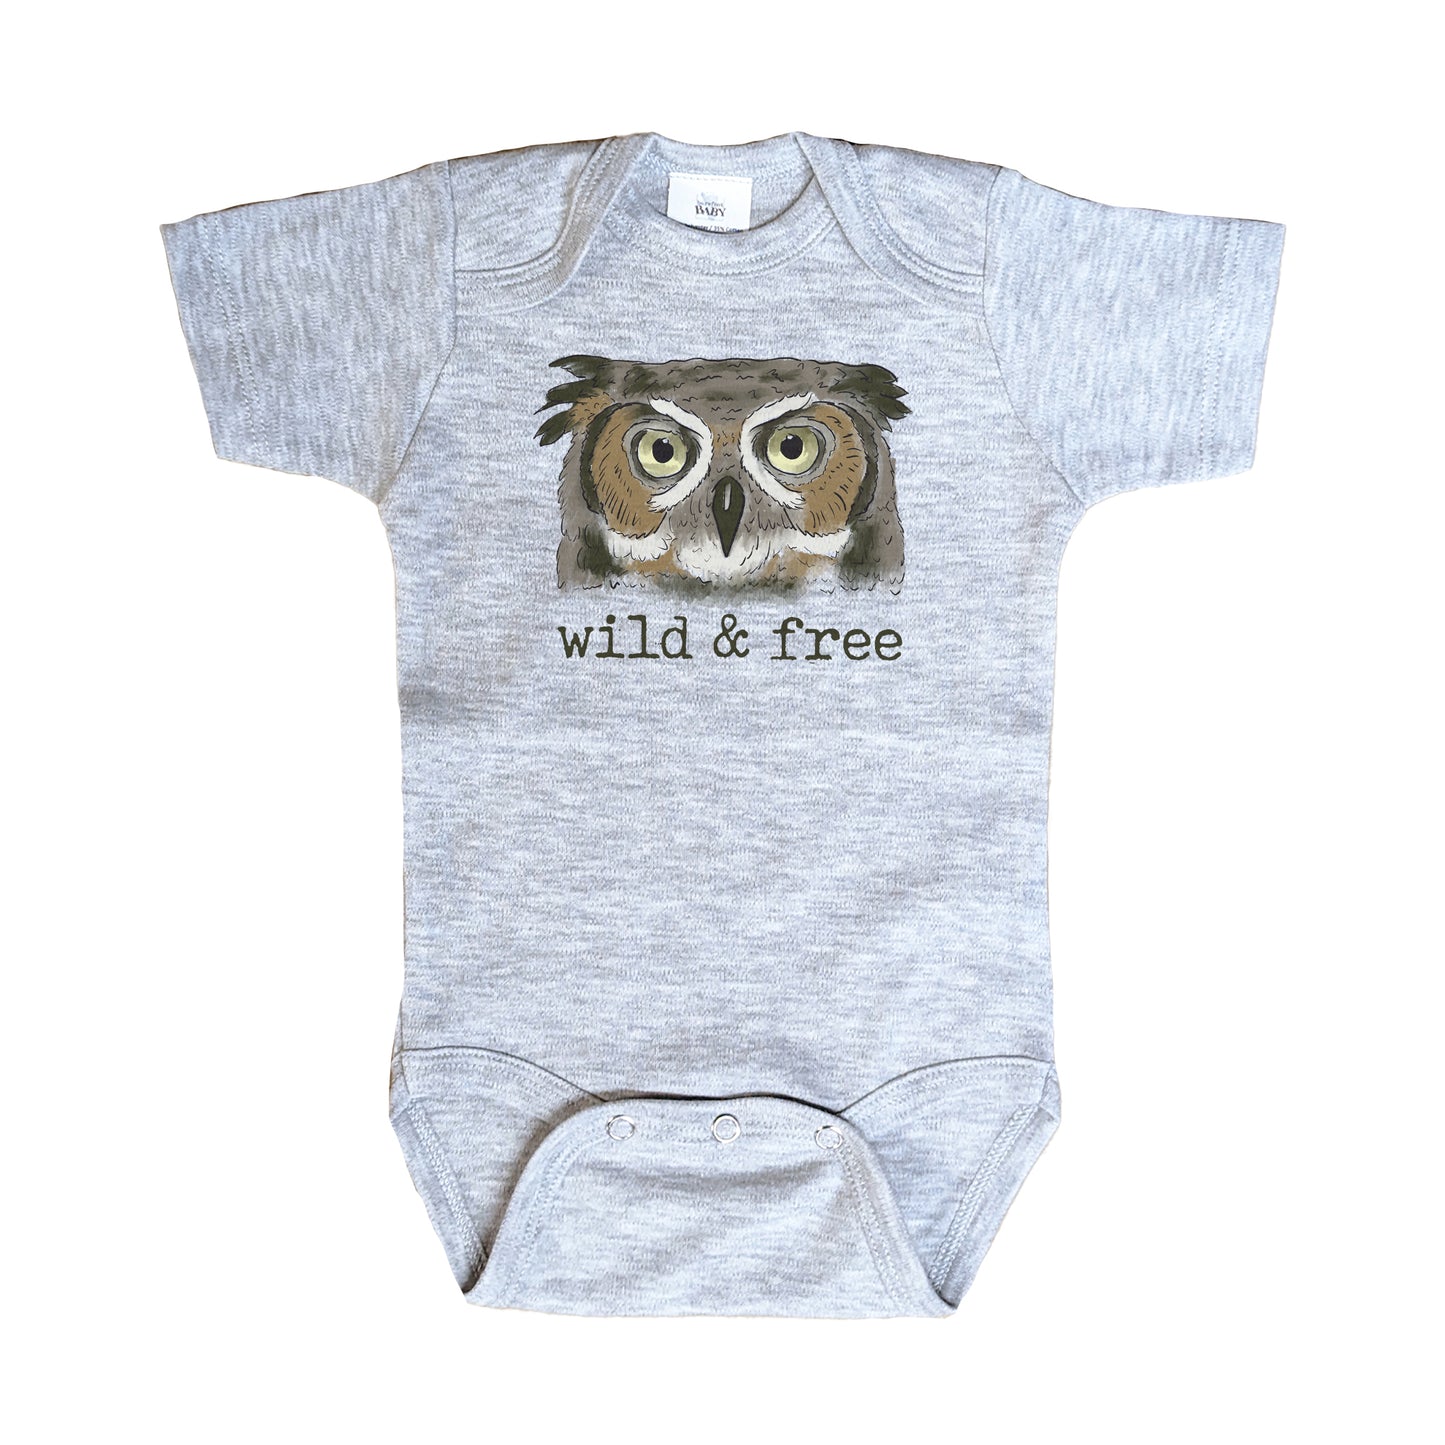 "Wild & Free" Grey Owl Body Suit for Little Explorers